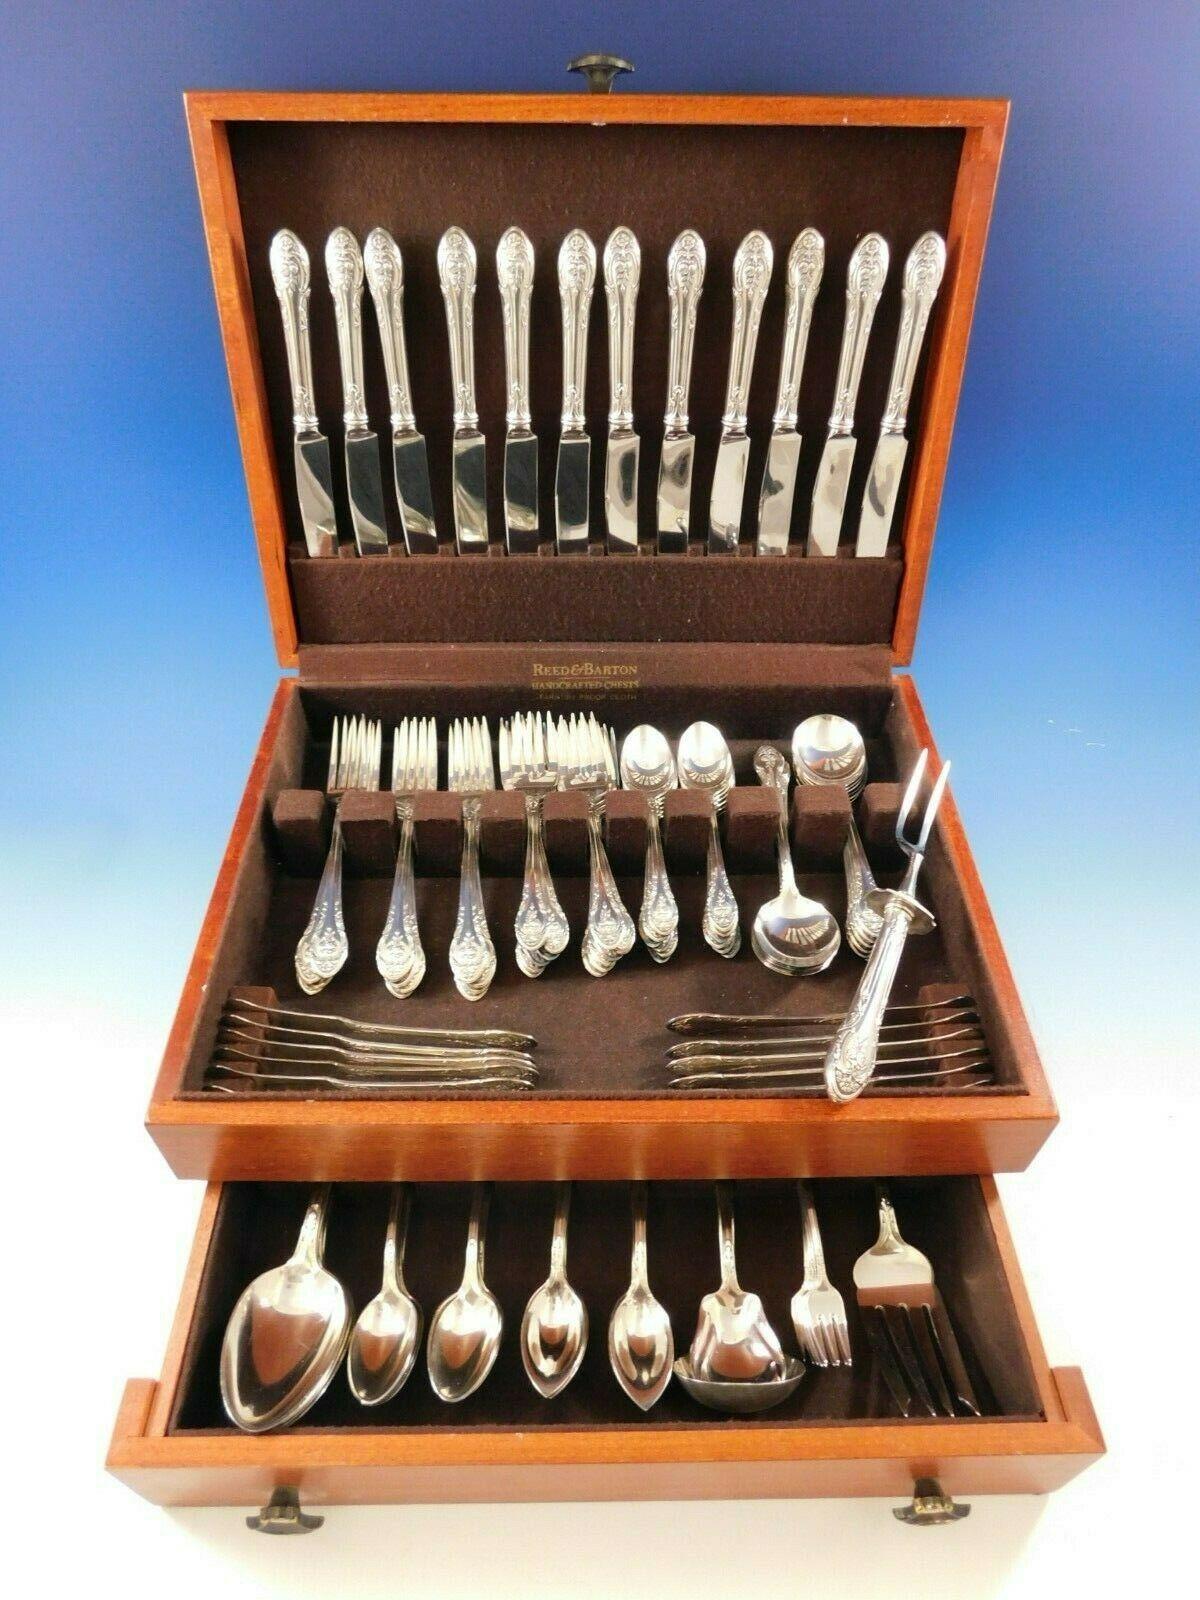 Huge Rosemont by Gorham Silverplate flatware set circa 1930 with rose motif - 114 pieces. This set includes:

12 knives, 8 3/4